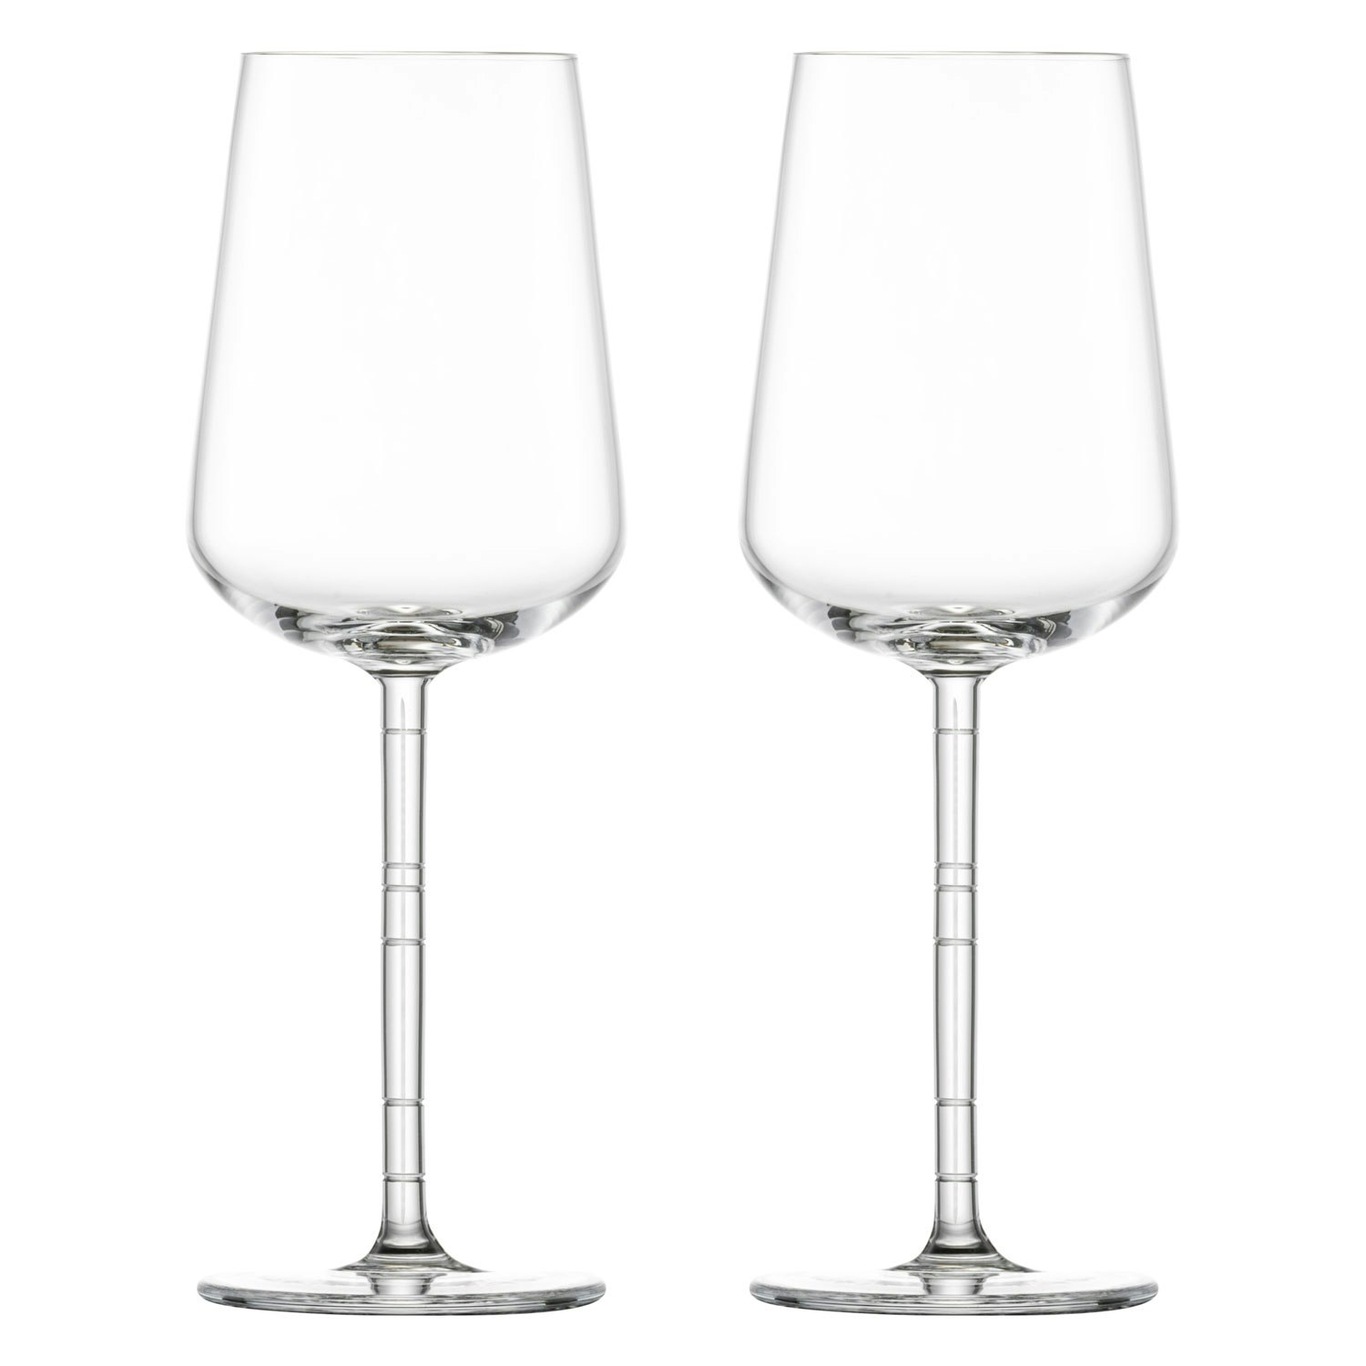 https://royaldesign.com/image/2/zwiesel-journey-claret-white-wine-glass-44-cl-2-pack-0?w=800&quality=80